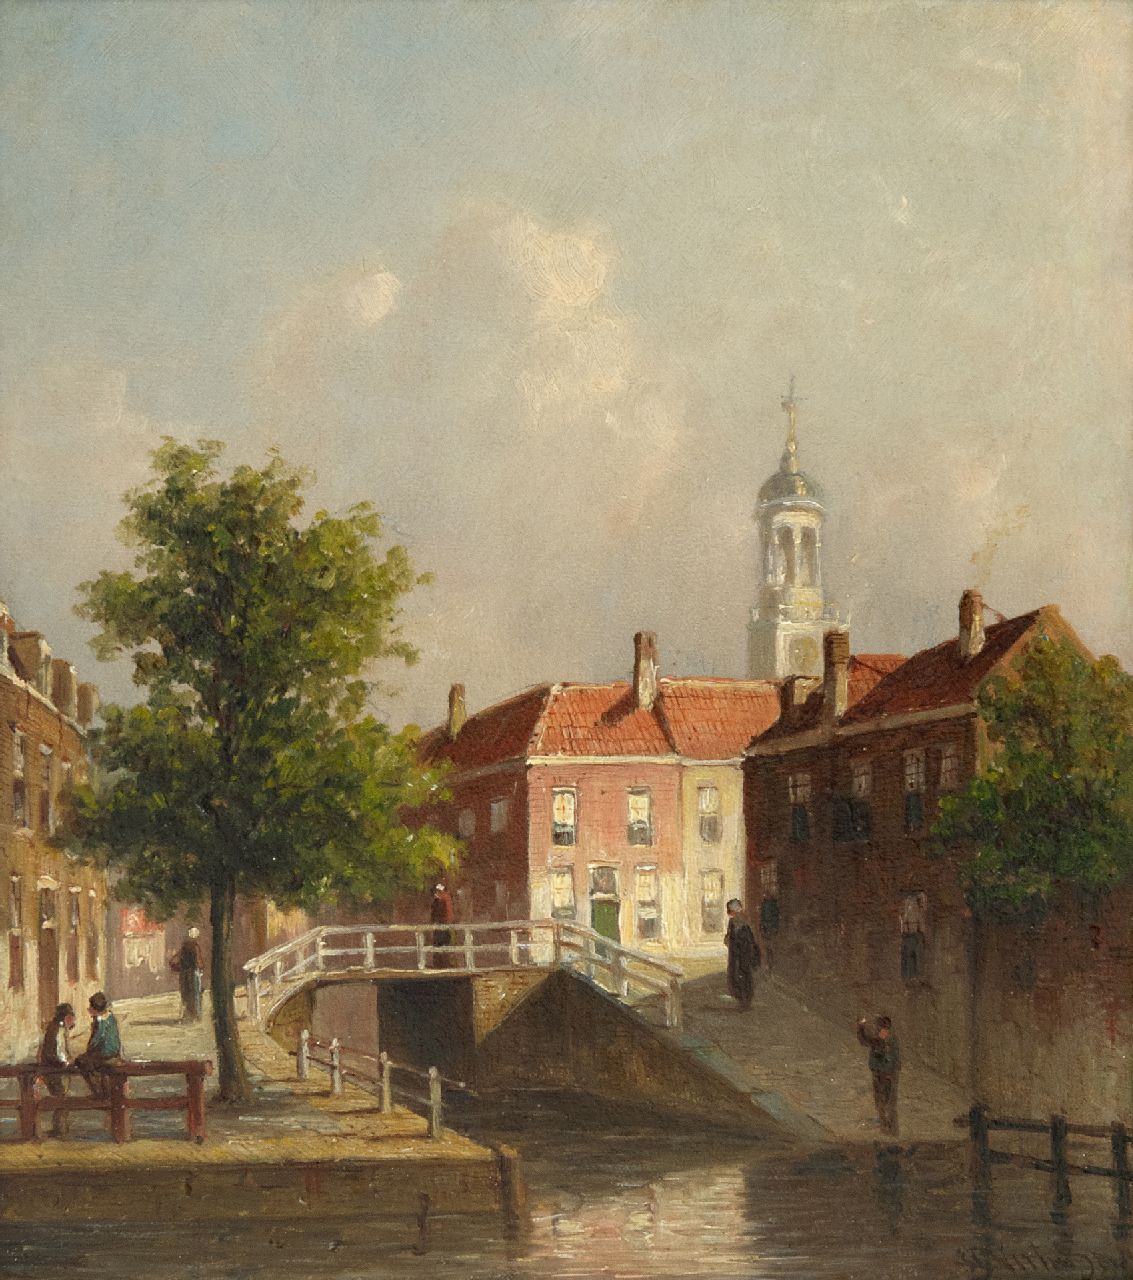 Vertin P.G.  | Petrus Gerardus Vertin | Paintings offered for sale | A view of the Nieuwe Gracht, corner Jansstraat, Haarlem, oil on panel 23.6 x 20.8 cm, signed l.r.